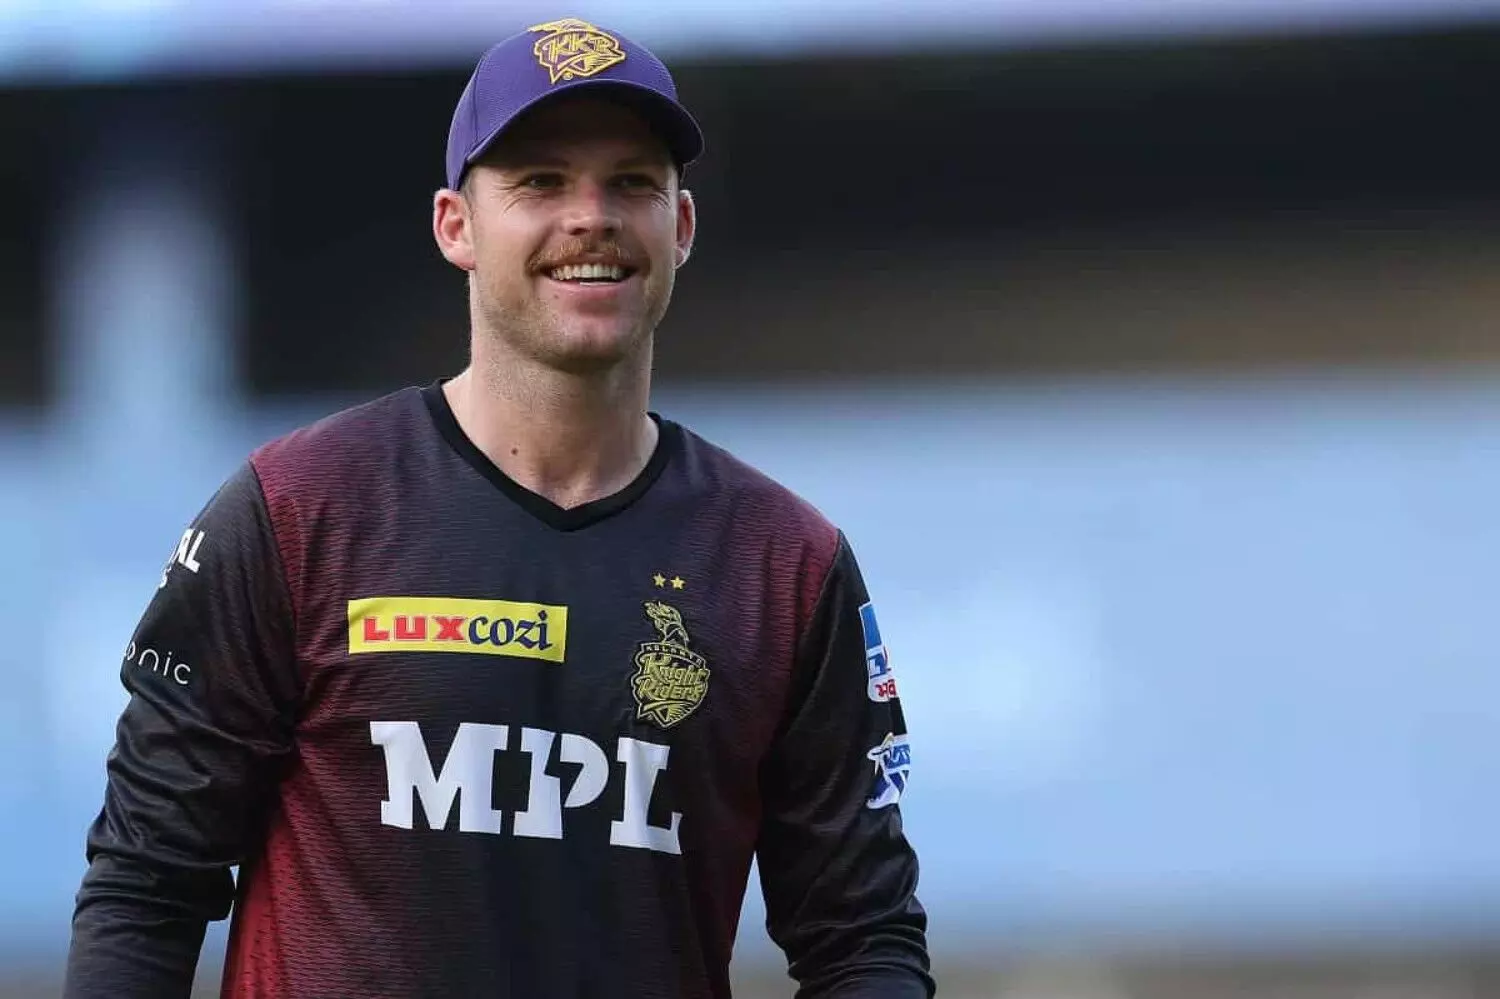 Delhi Capitals IPL 2023 retention: DC full list of retained players,  released players, purse remaining for auction - Sportstar